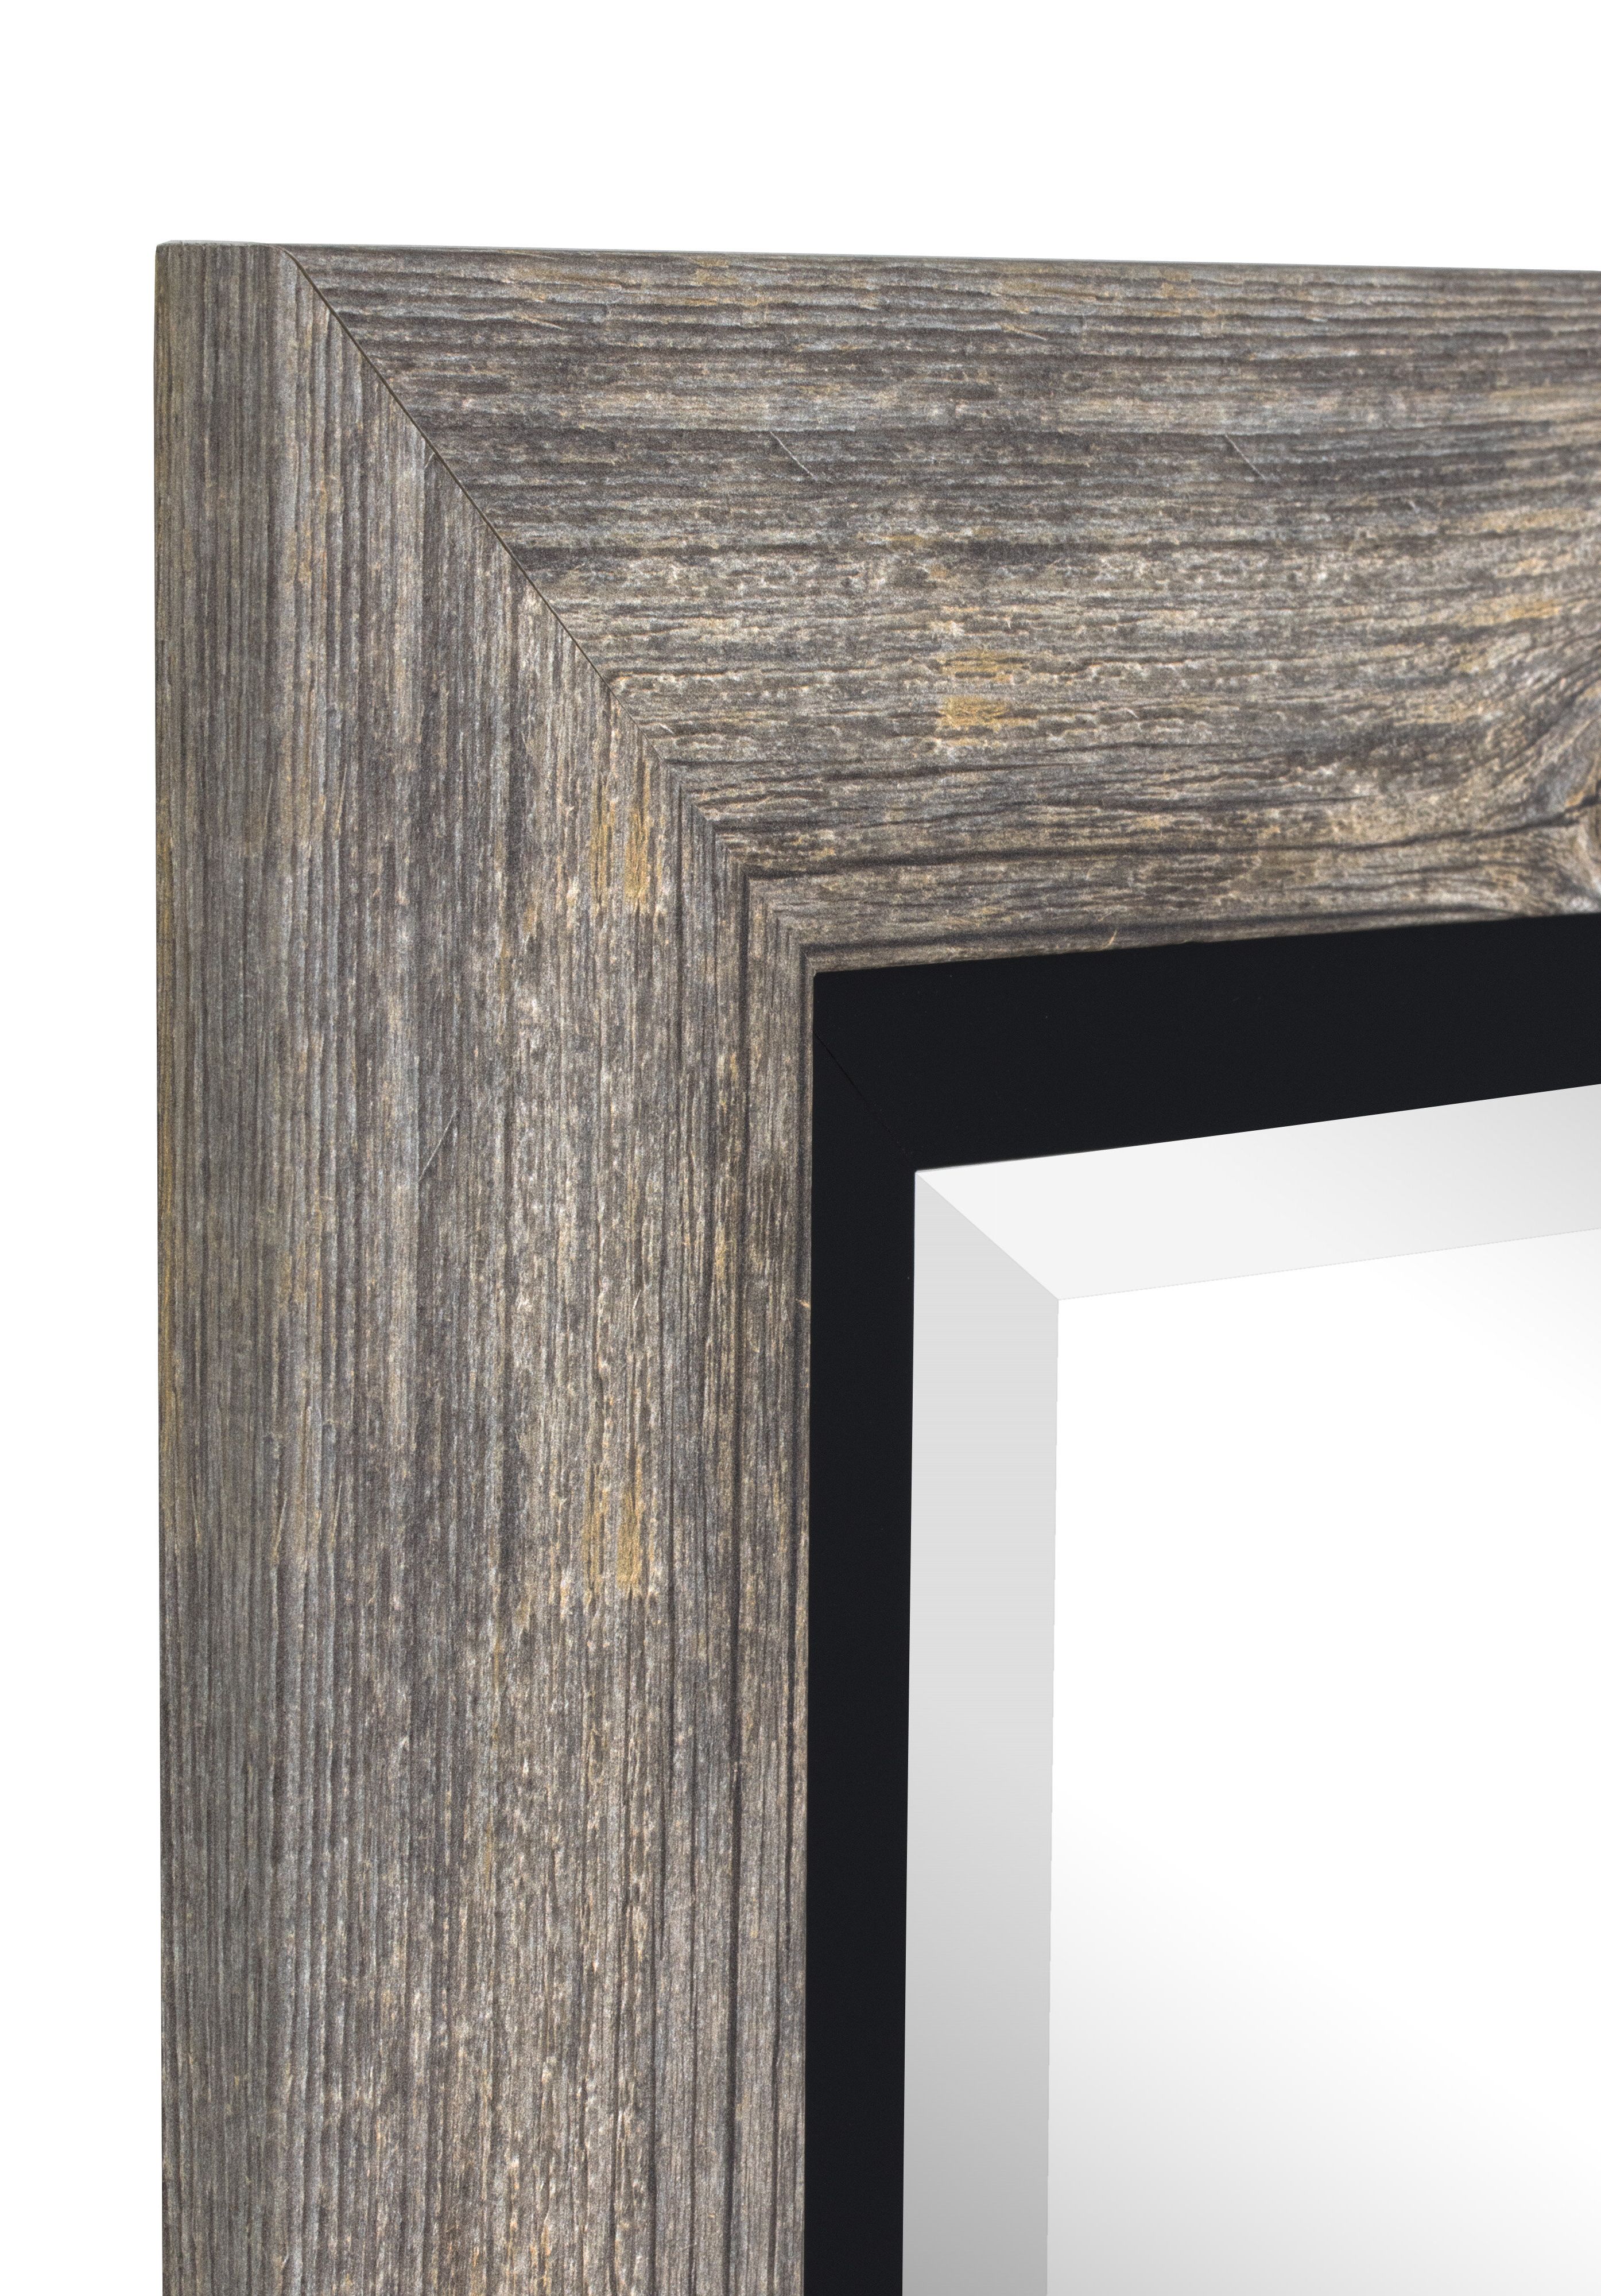 Hilde Traditional Beveled Bathroom Mirror With Regard To Fashionable Hilde Traditional Beveled Bathroom Mirrors (View 3 of 20)